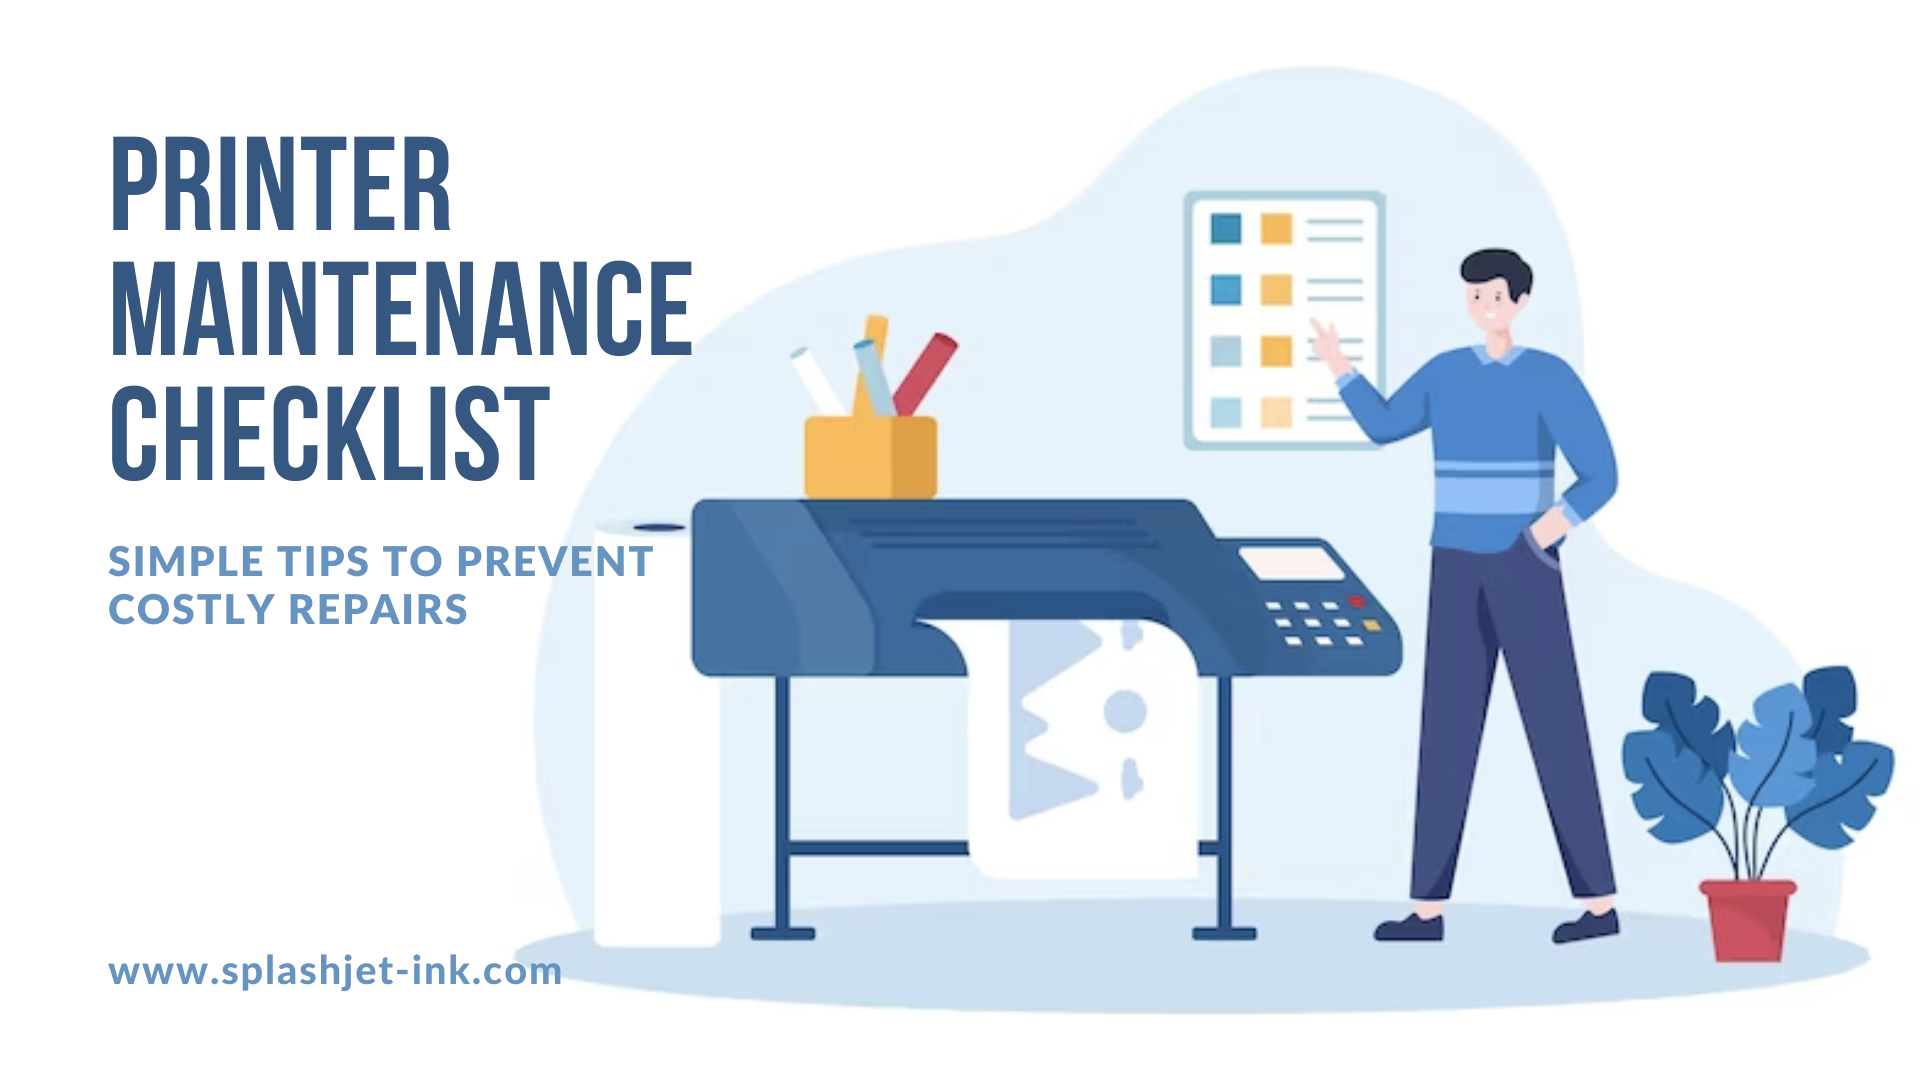 Printer Maintenance Checklist – Simple Tips To Prevent Costly Repairs